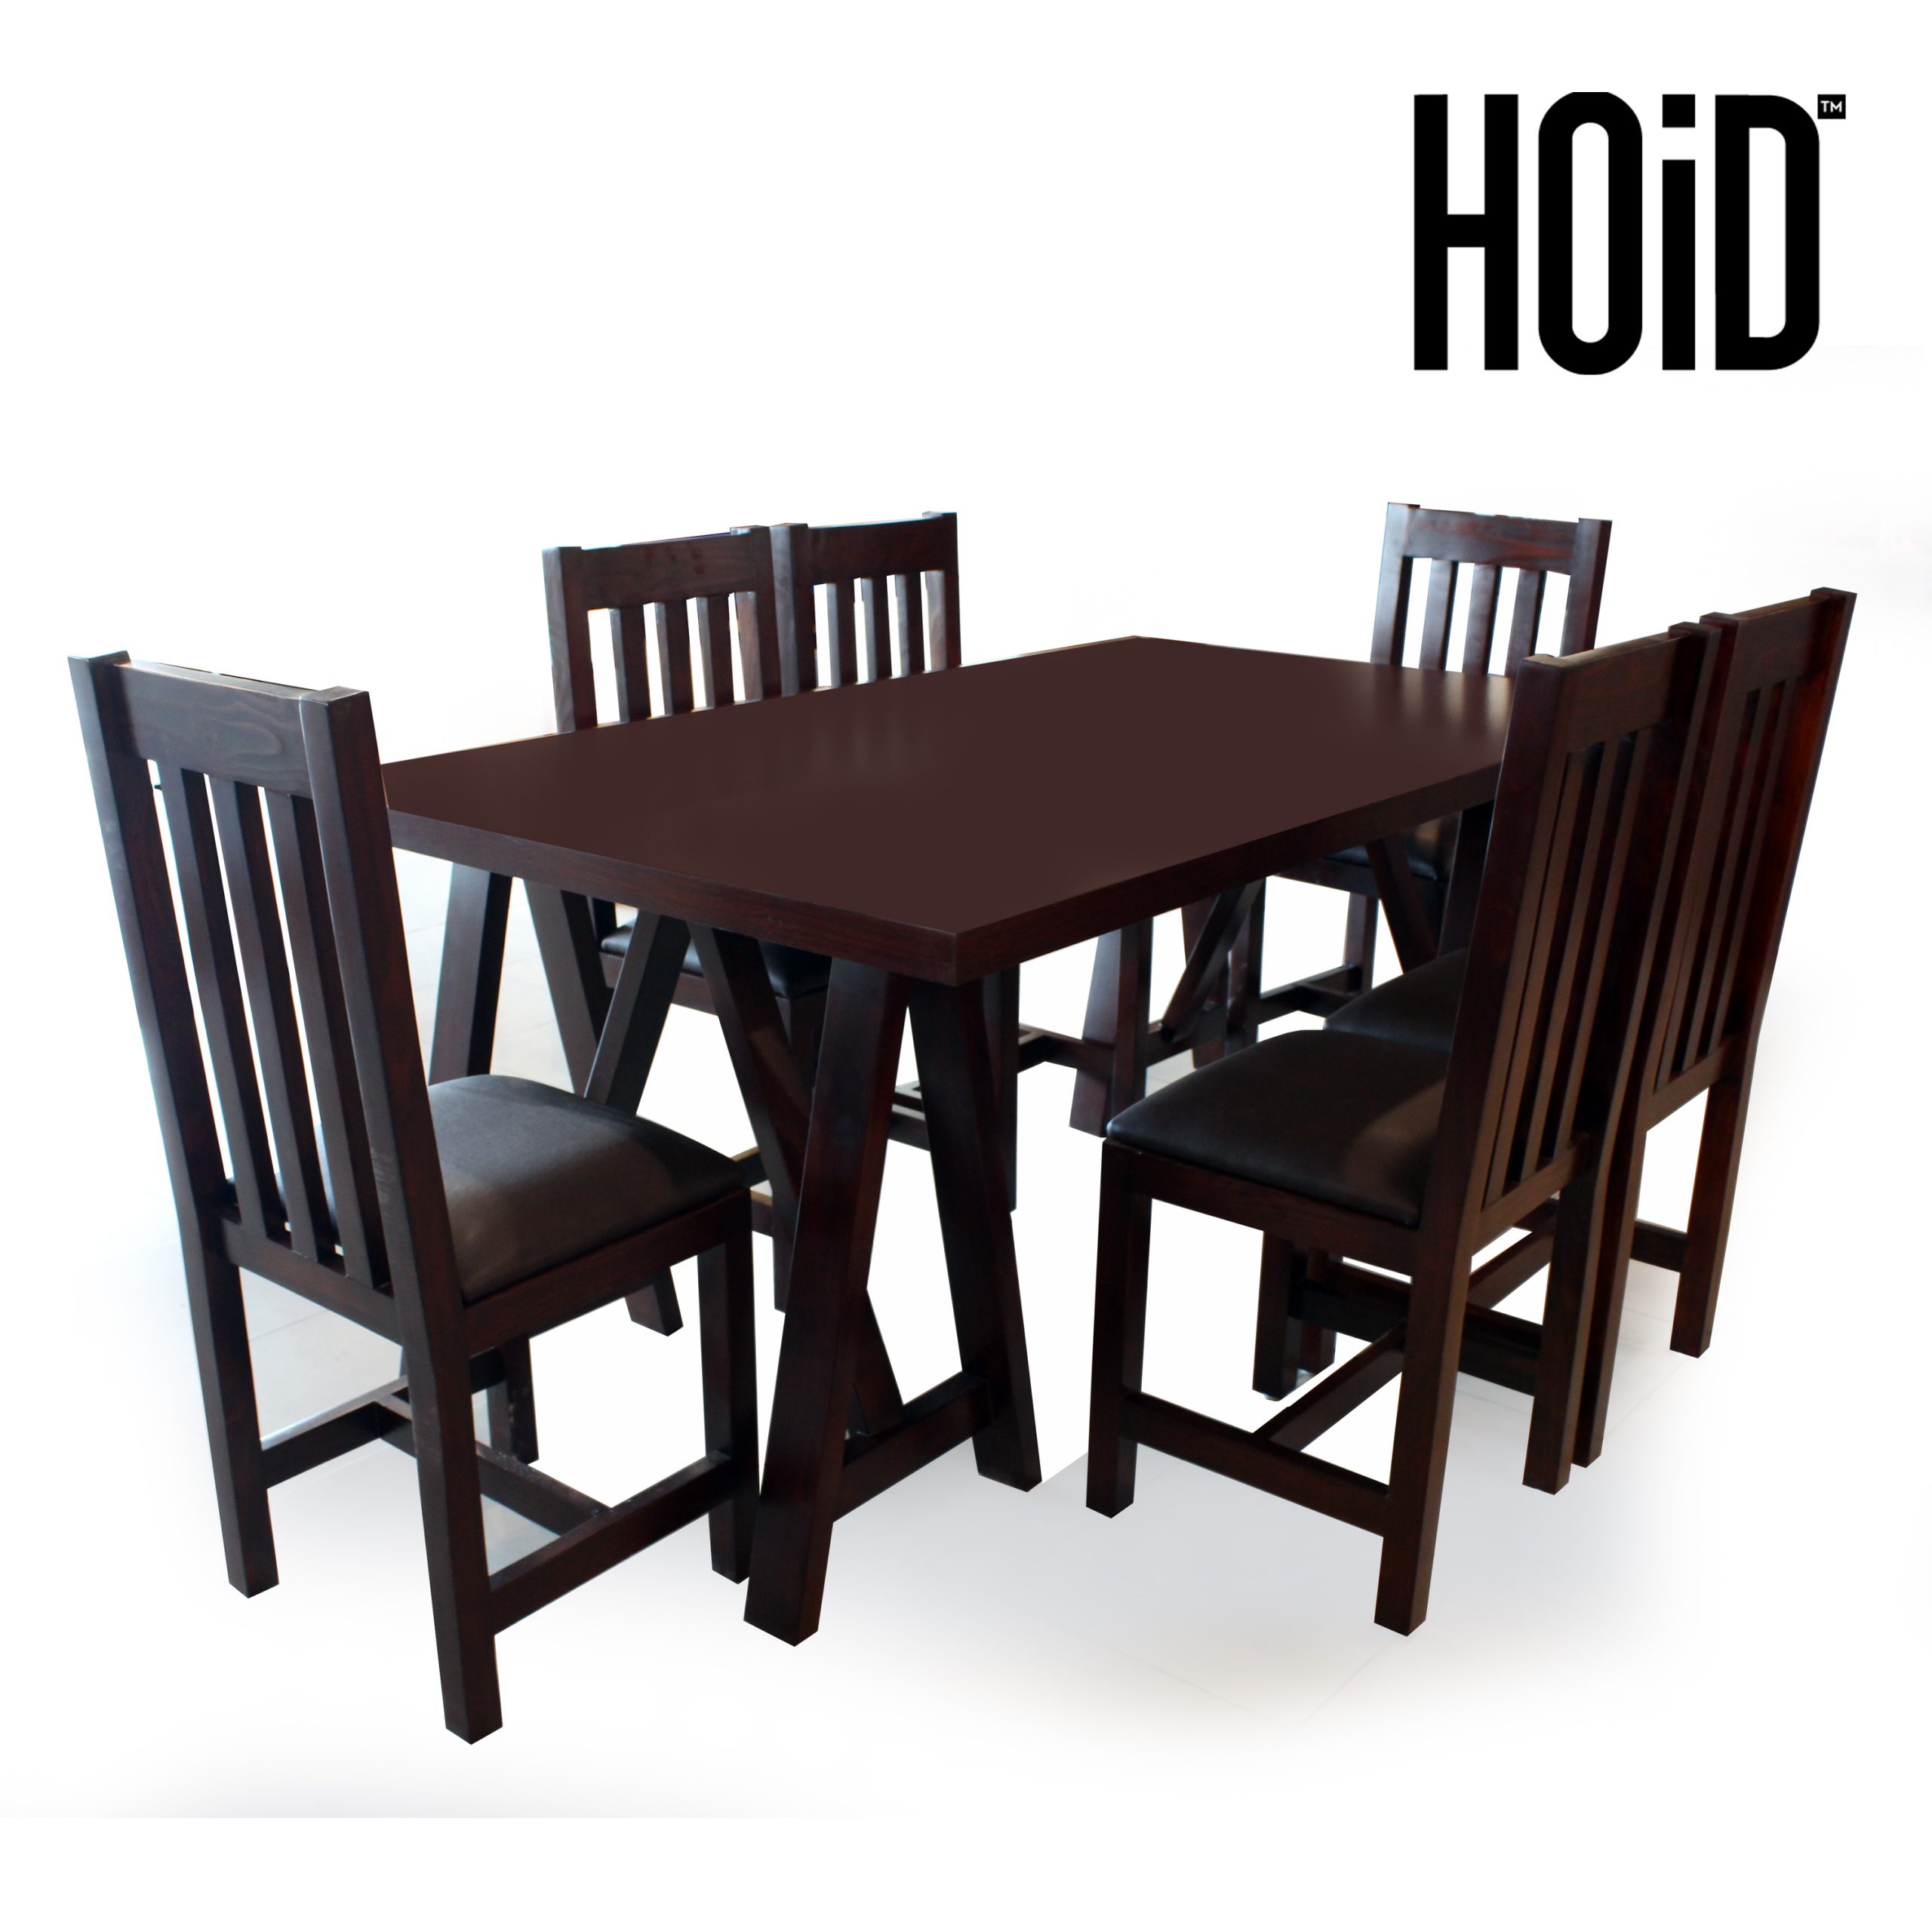 largo-dining-table-n-6-chairs-scaled-2.jpg